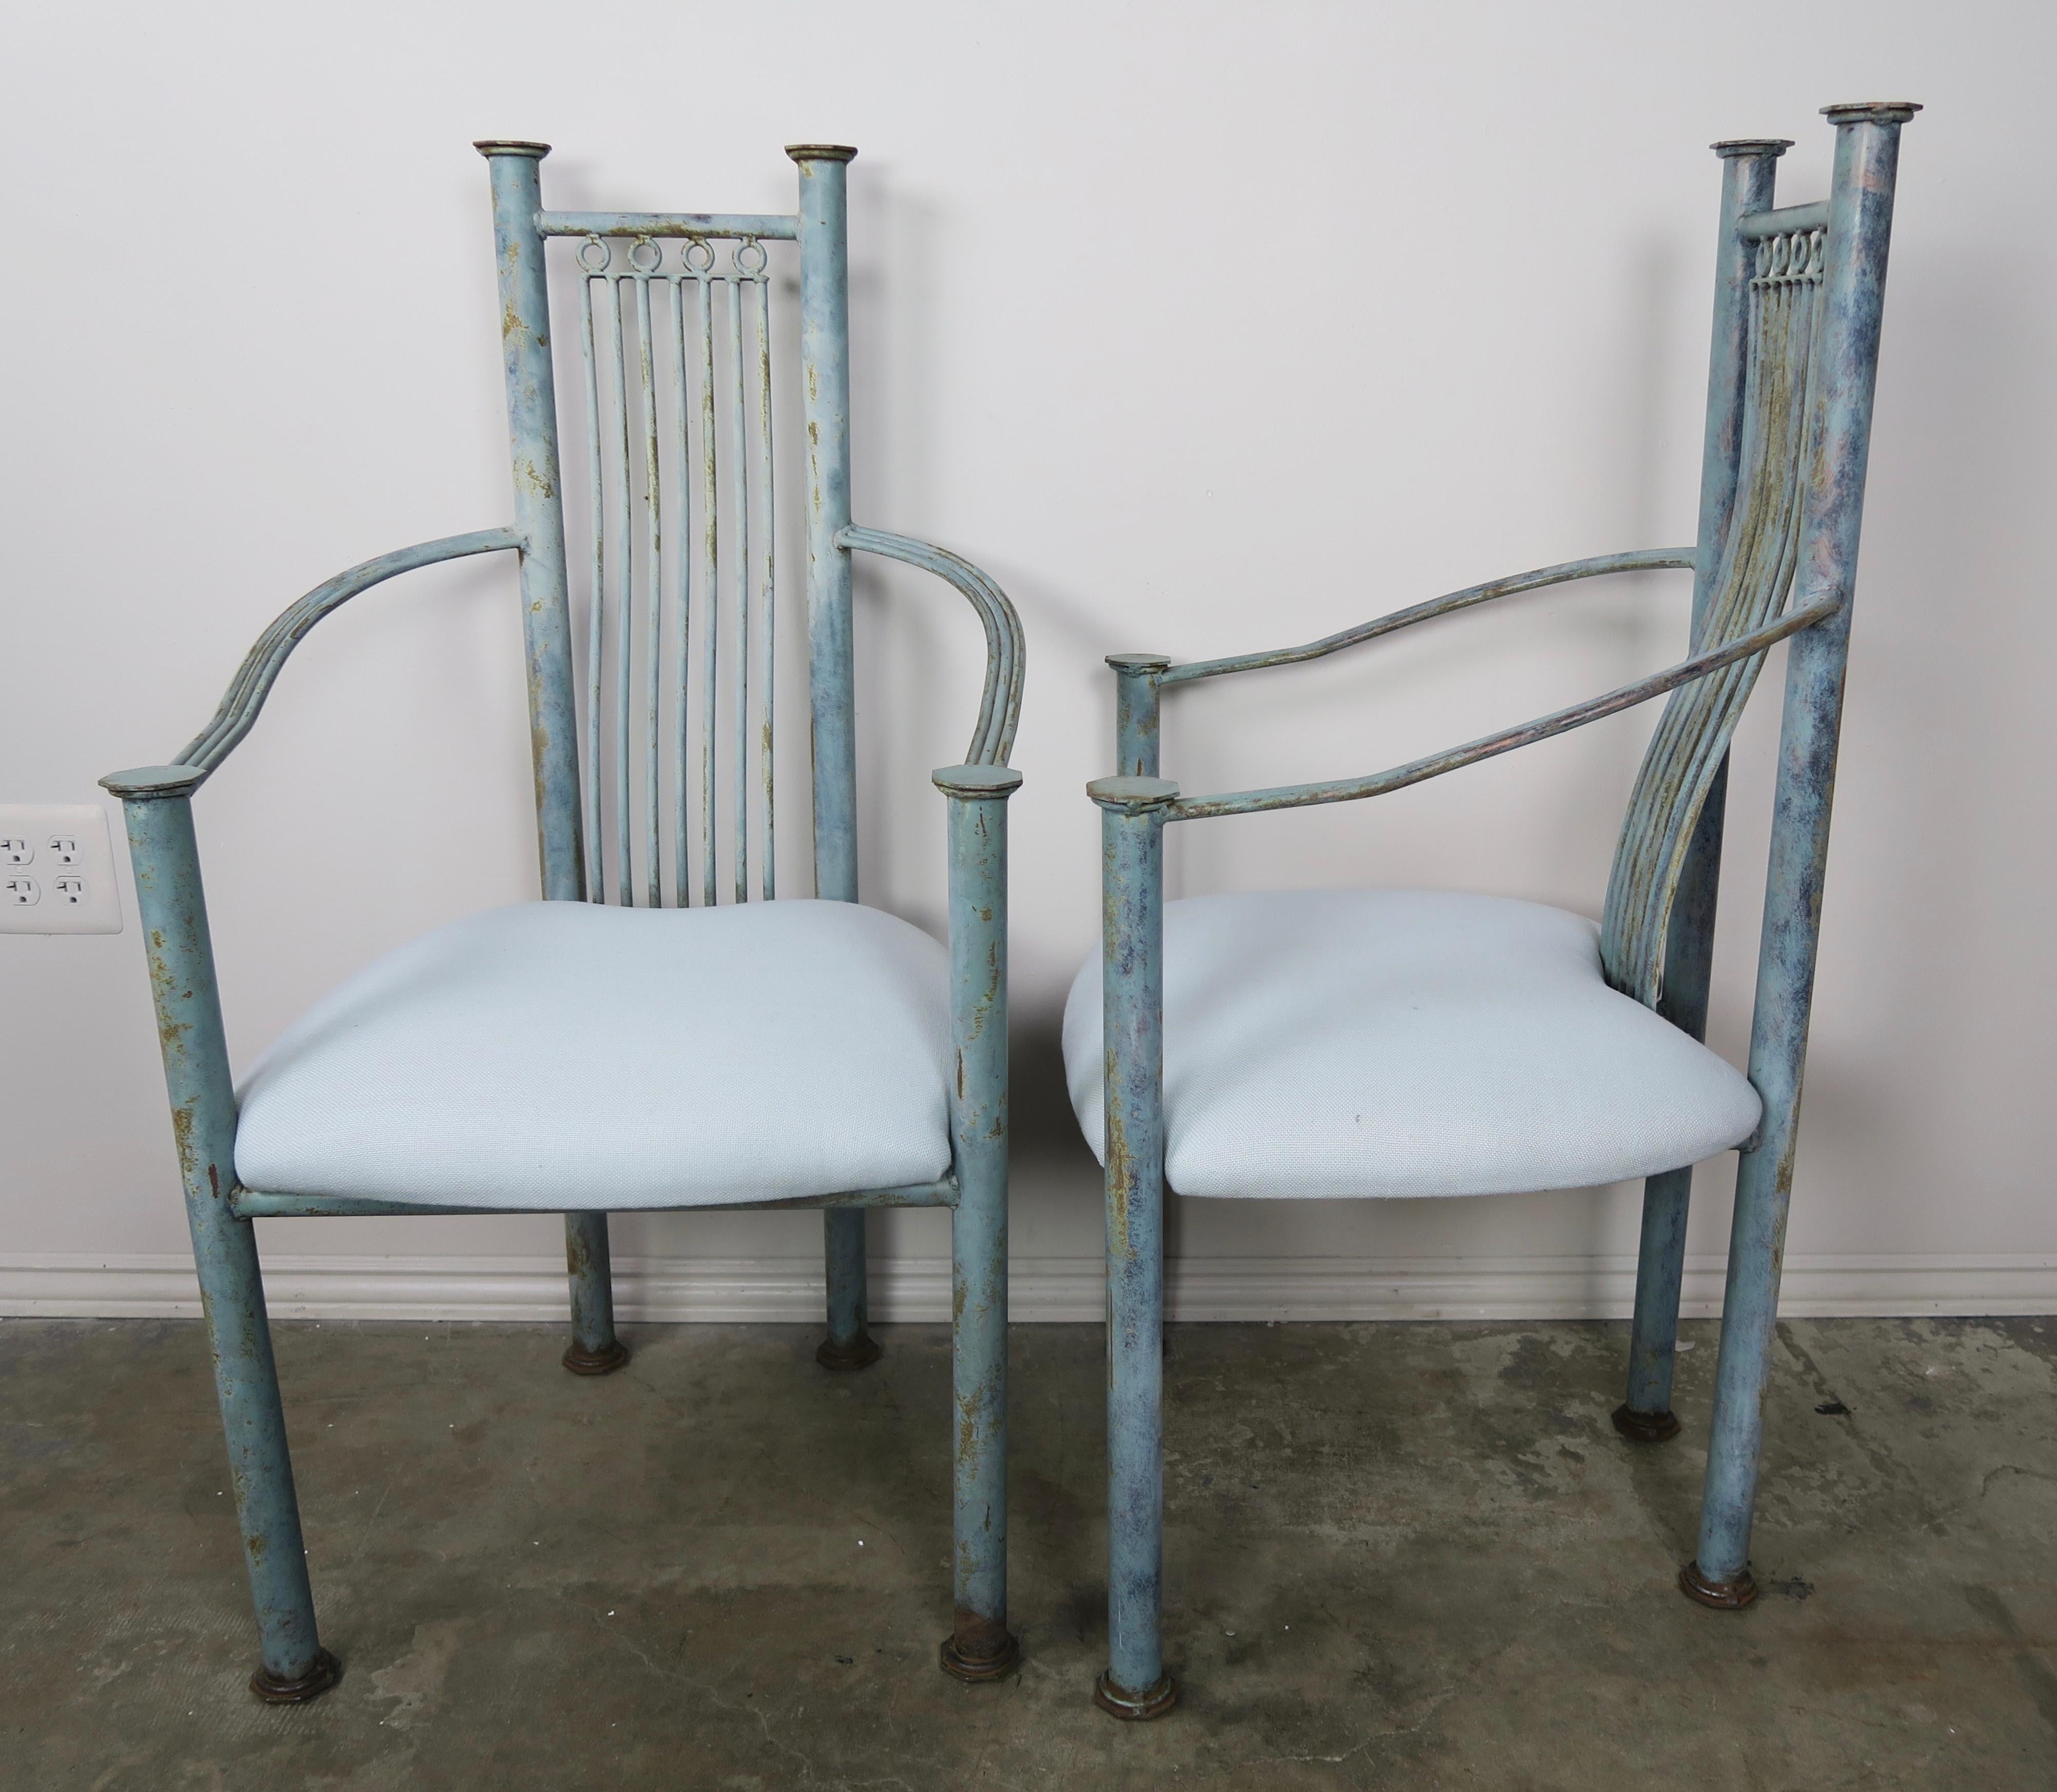 20th Century Set of Six Painted Iron Dining Chairs with Linen Seats